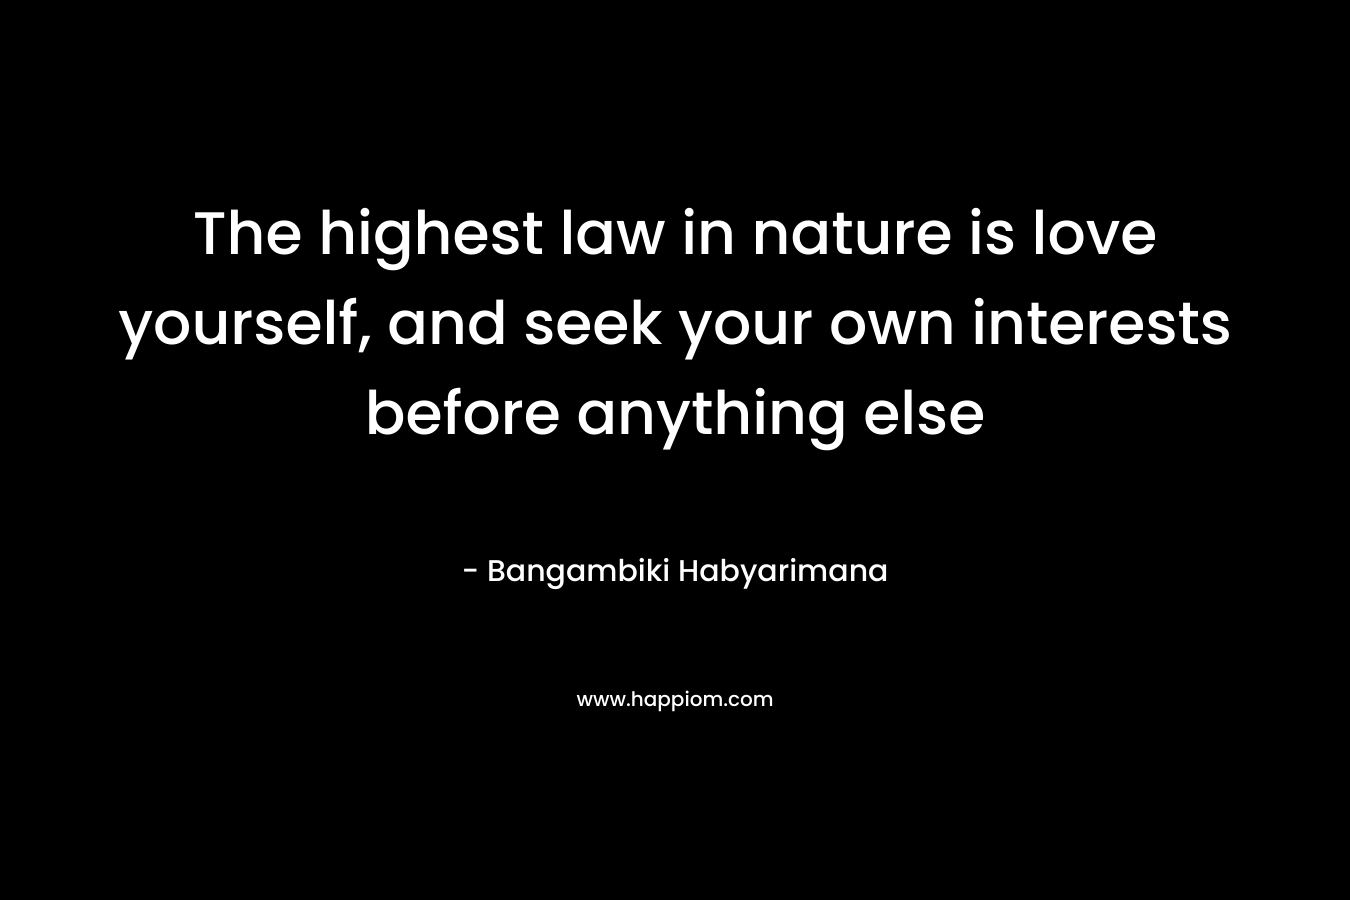 The highest law in nature is love yourself, and seek your own interests before anything else – Bangambiki Habyarimana